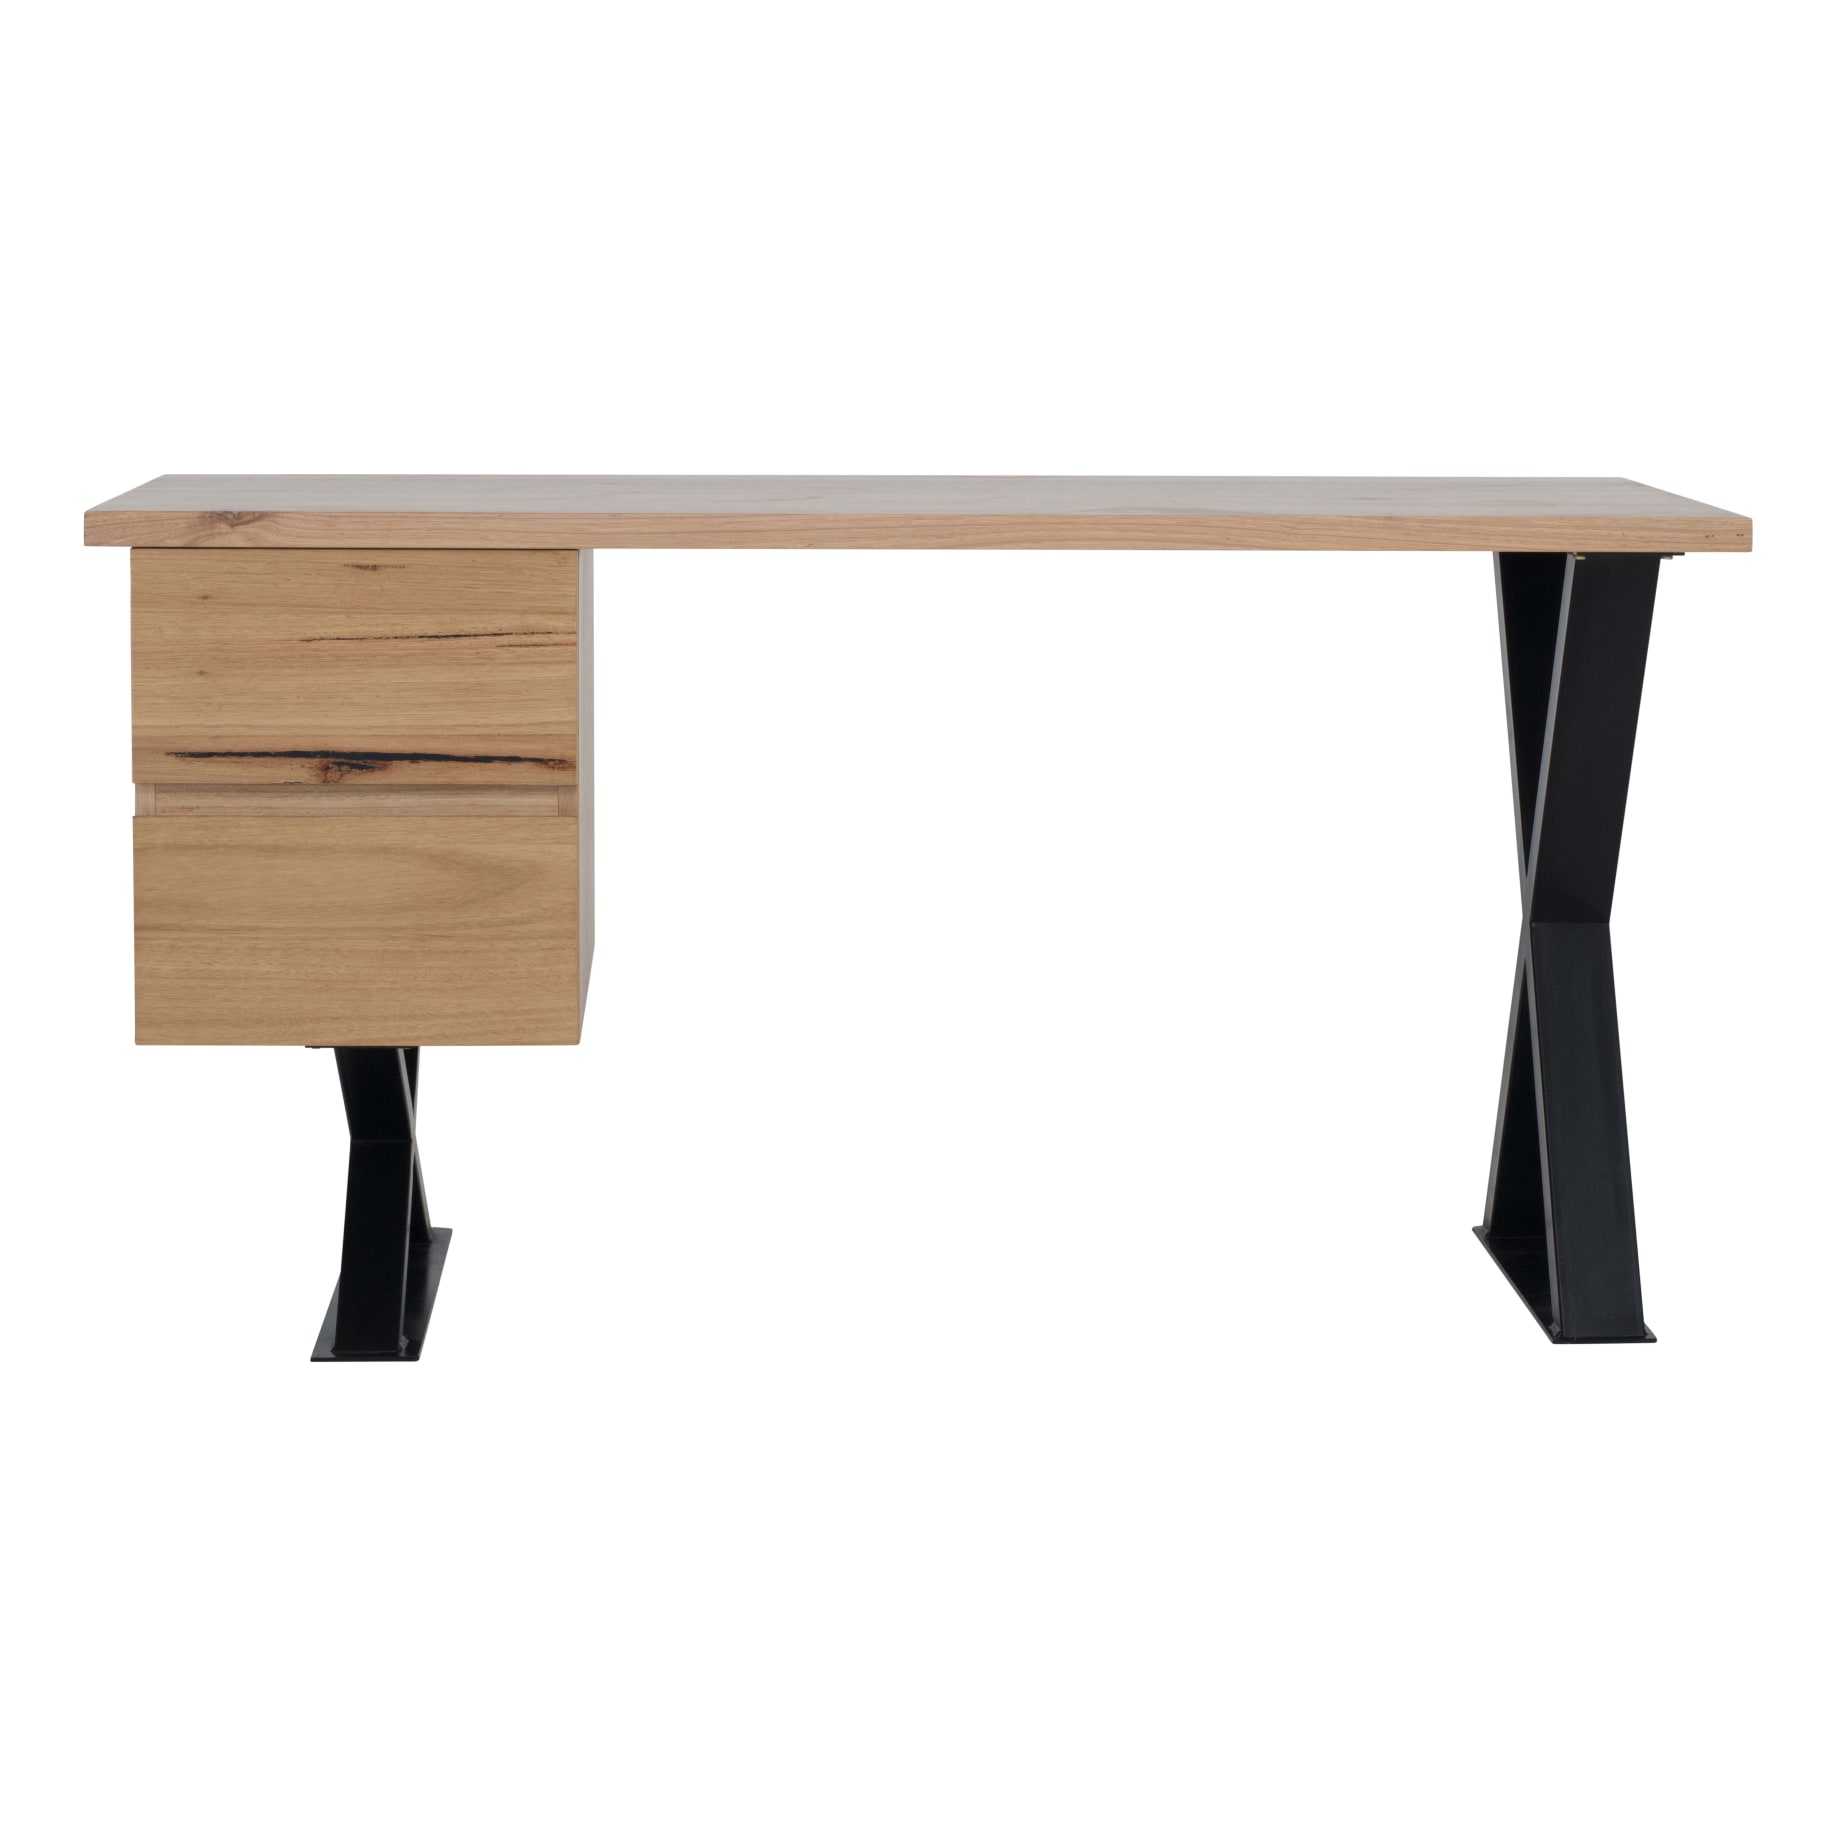 Rawson Desk (With Drawers) in Messmate